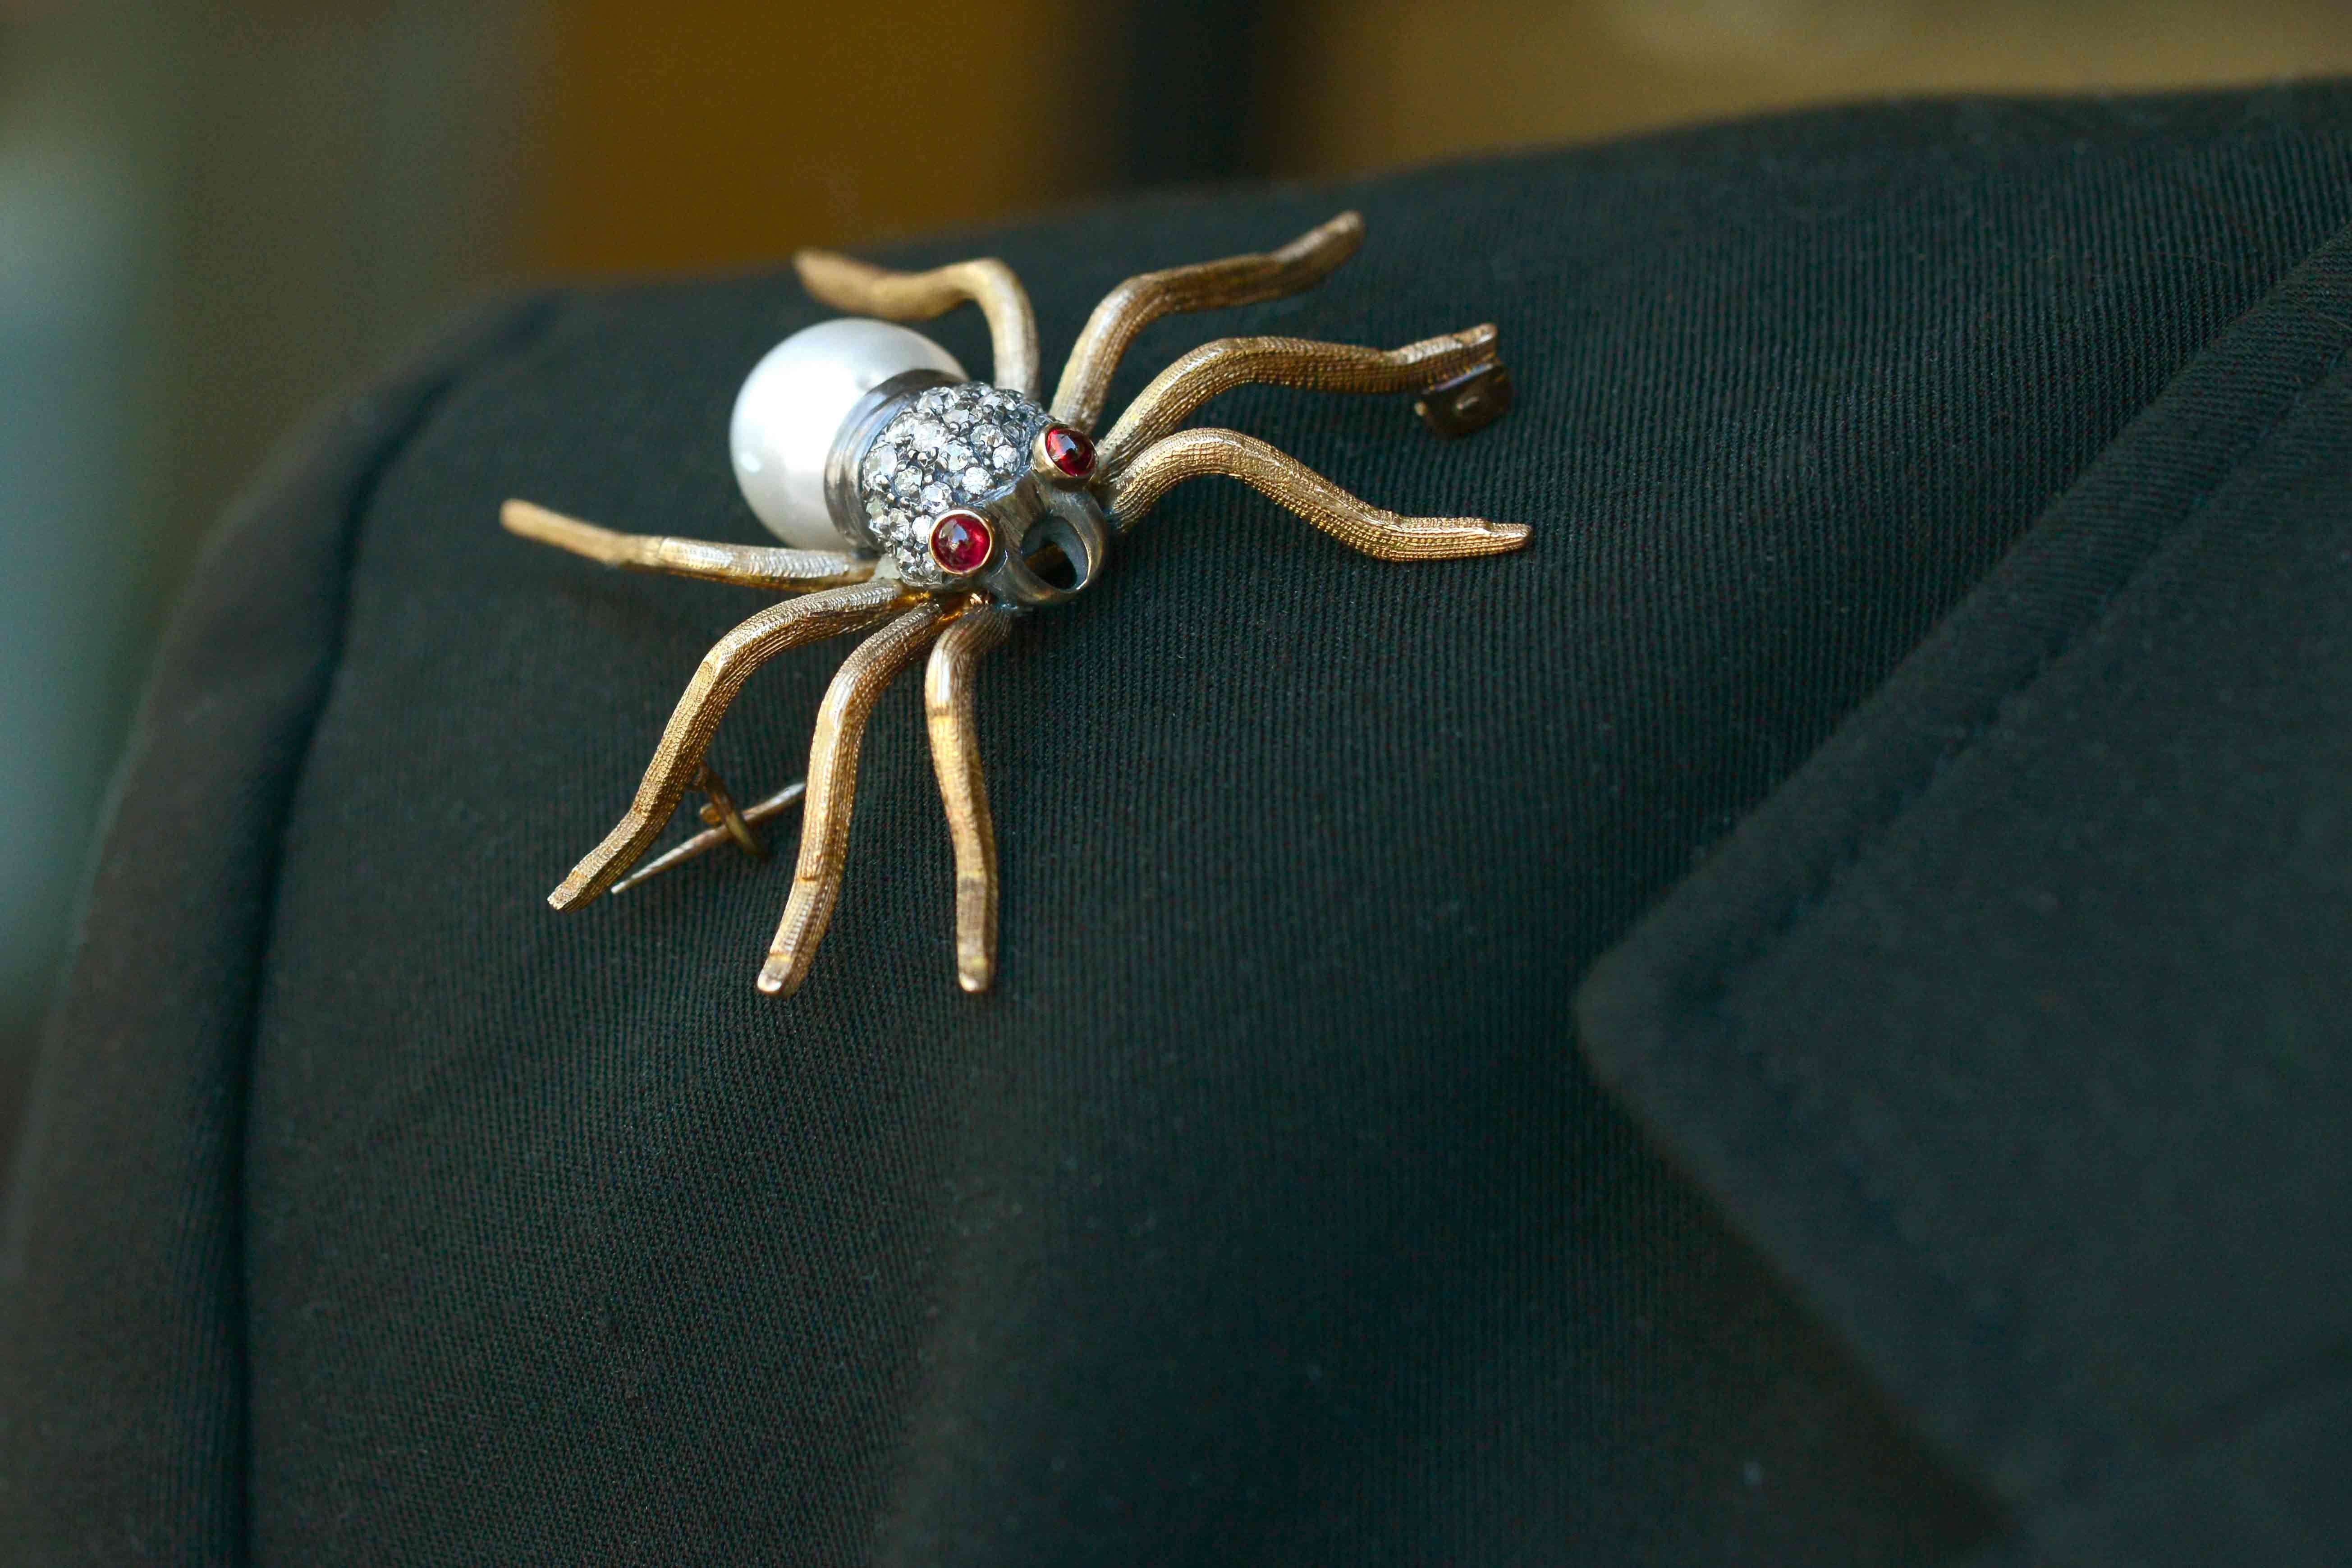 A dramatic diamond spider brooch, this antique Victorian tarantula pin pendant is centered by a luminous, giant South Sea pearl and is studded with twinkling old mine cut diamonds. The entrancing ruby eyes will put people under your spell. Crafted